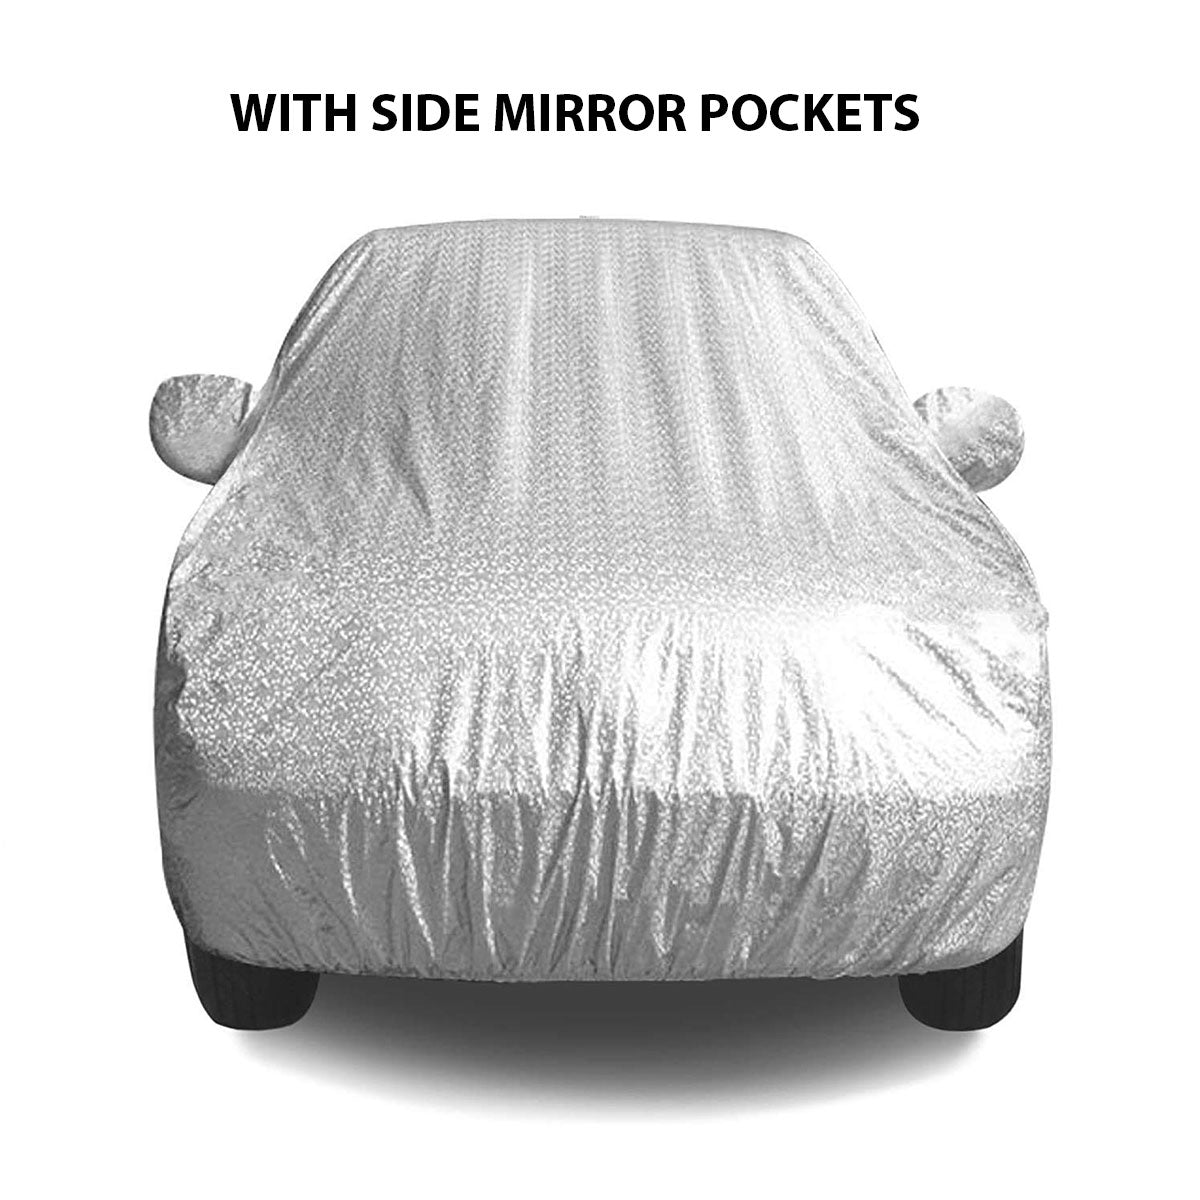 Oshotto Spyro Silver Anti Reflective, dust Proof and Water Proof Car Body Cover with Mirror Pockets For Tata Nexon ev (with Antenna Pocket)